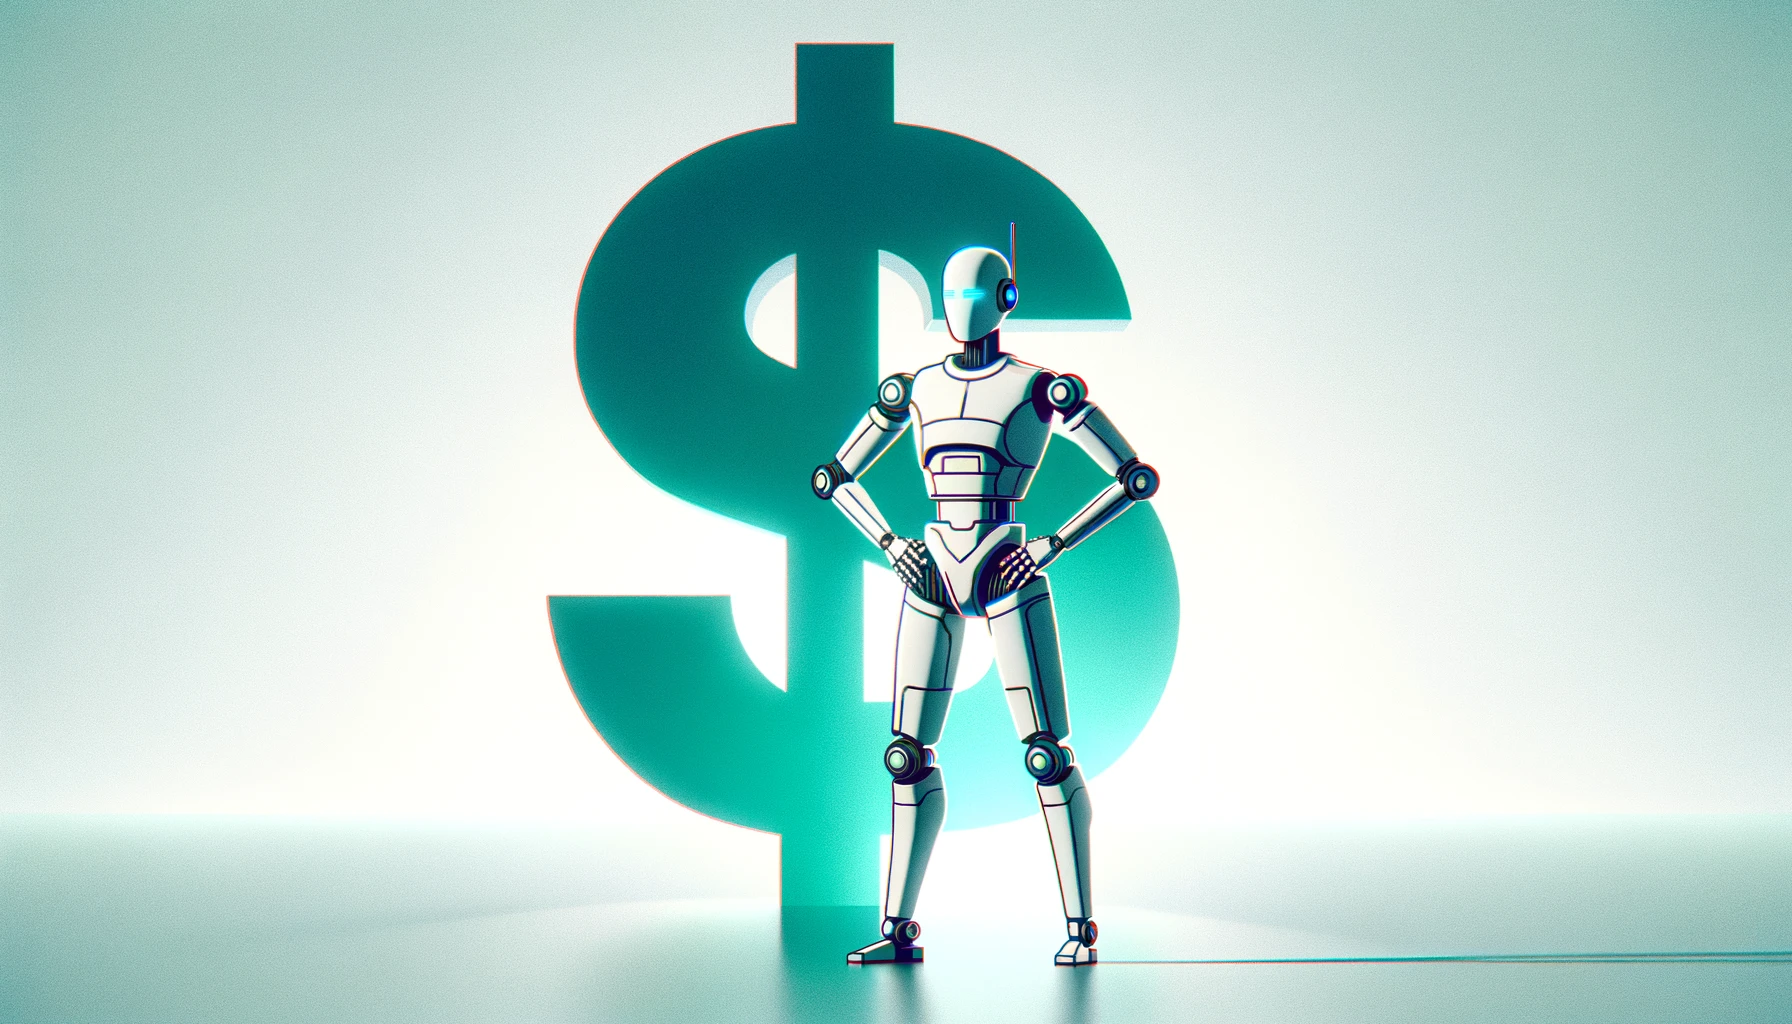 Figure achieves a $2.6 billion valuation by capitalizing on the excitement surrounding humanoid robots.